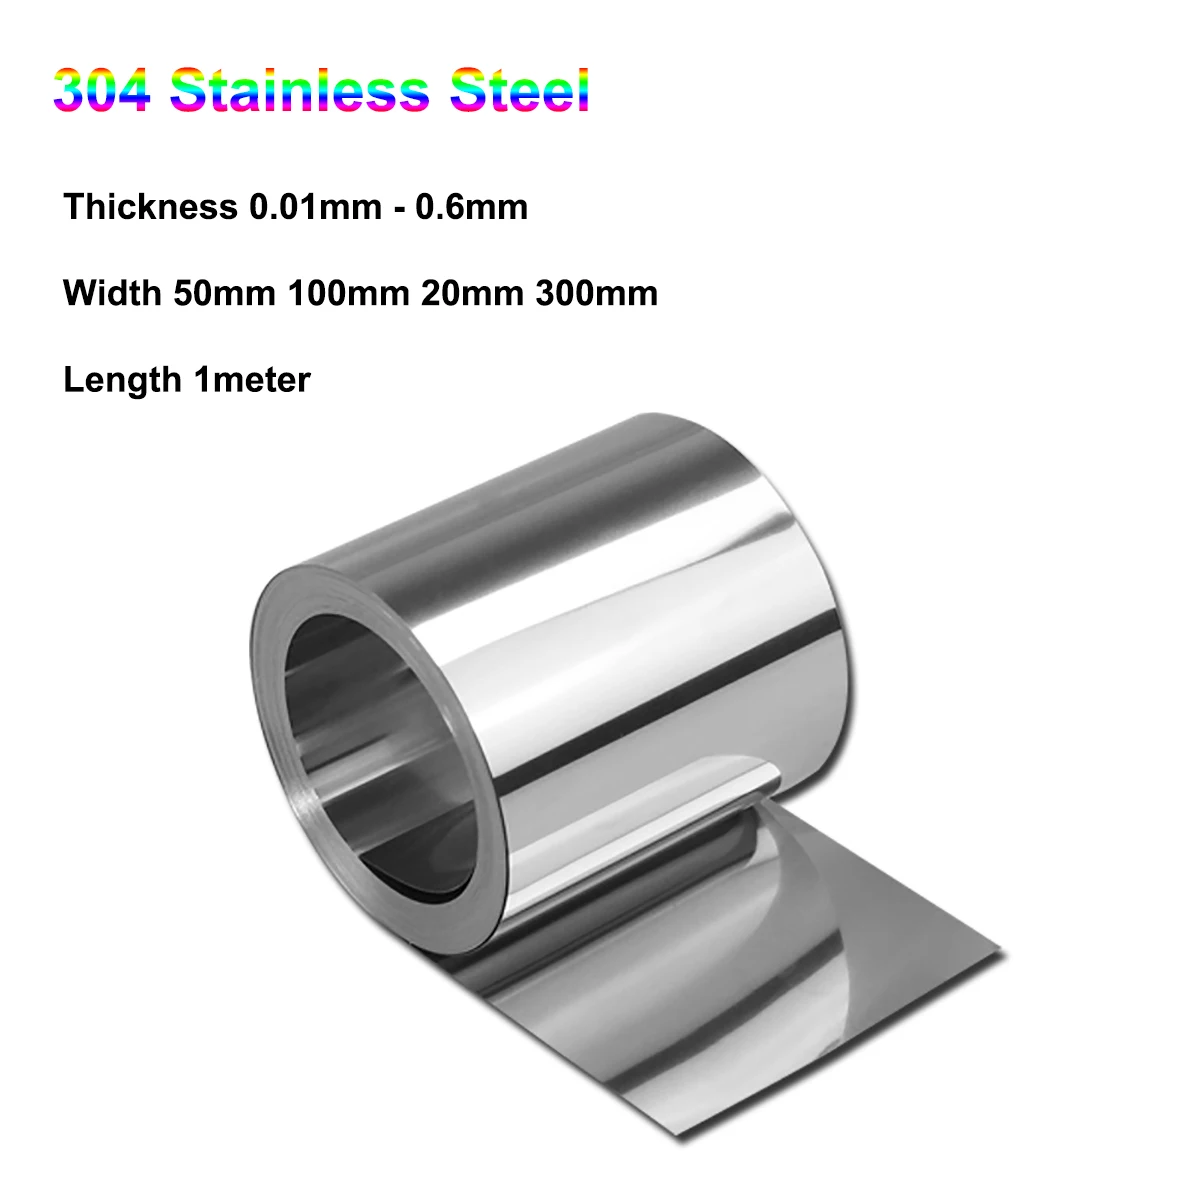 

1 Roll Length 1meter 304 Stainless Steel Foil Strip Thin Plate Sheet Width 200mm 300mm Thickness 0.02mm - 0.6mm